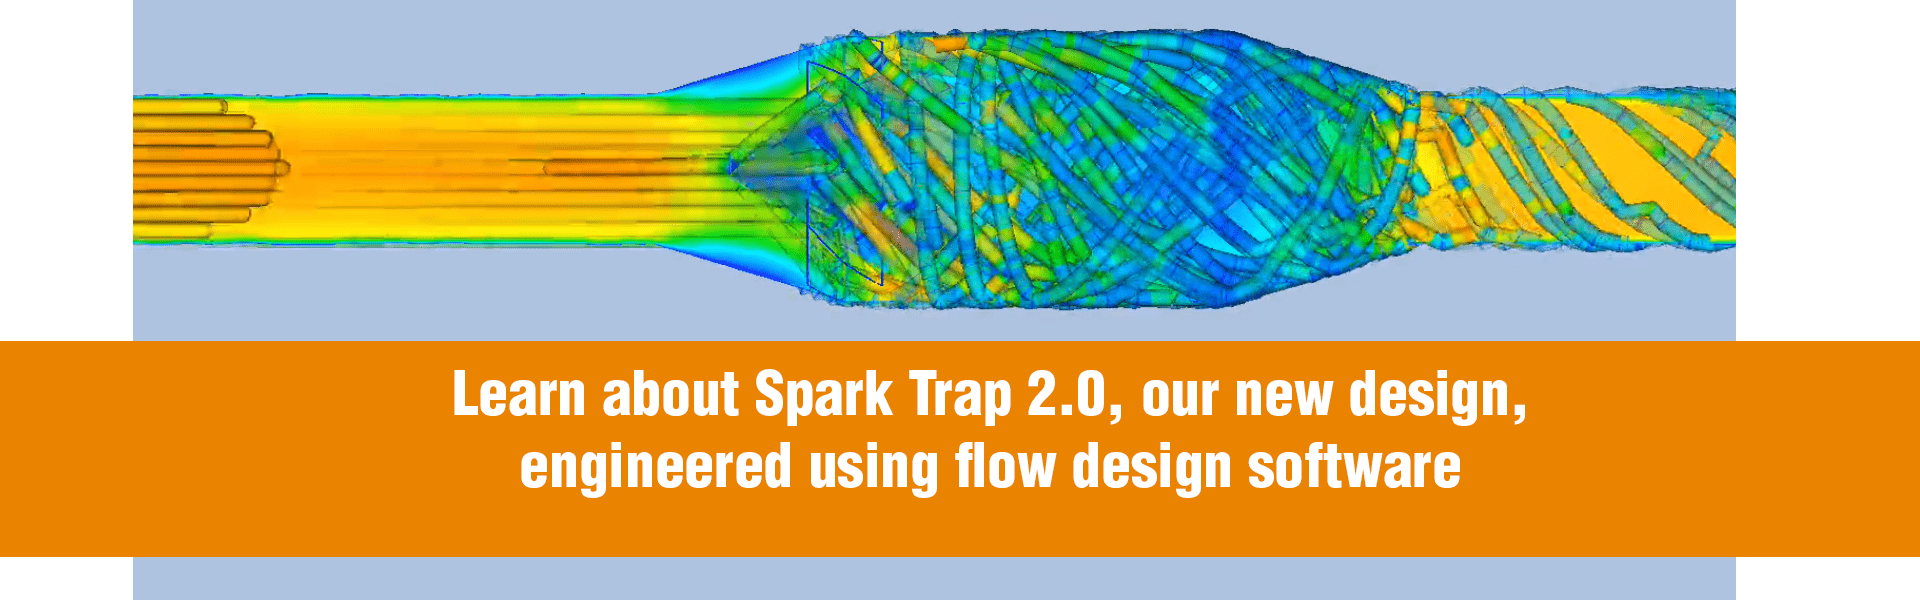 introducing Spark Trap 2.0